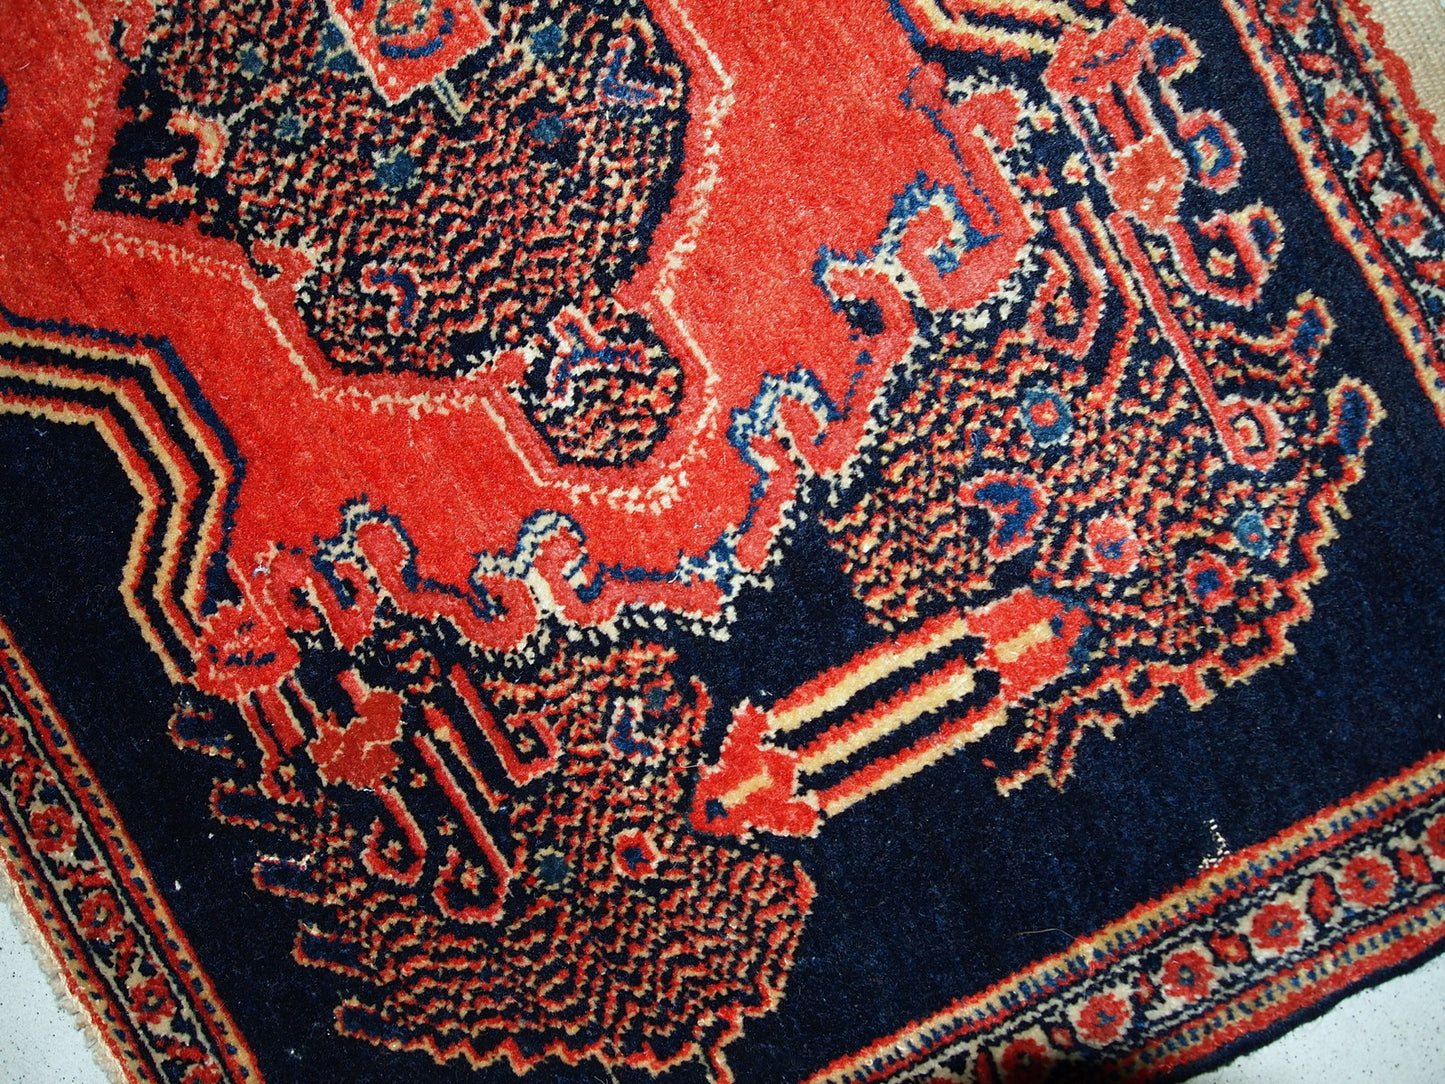 Antique Persian Senneh rugs in original good condition. Very fine rugs with detailed design.